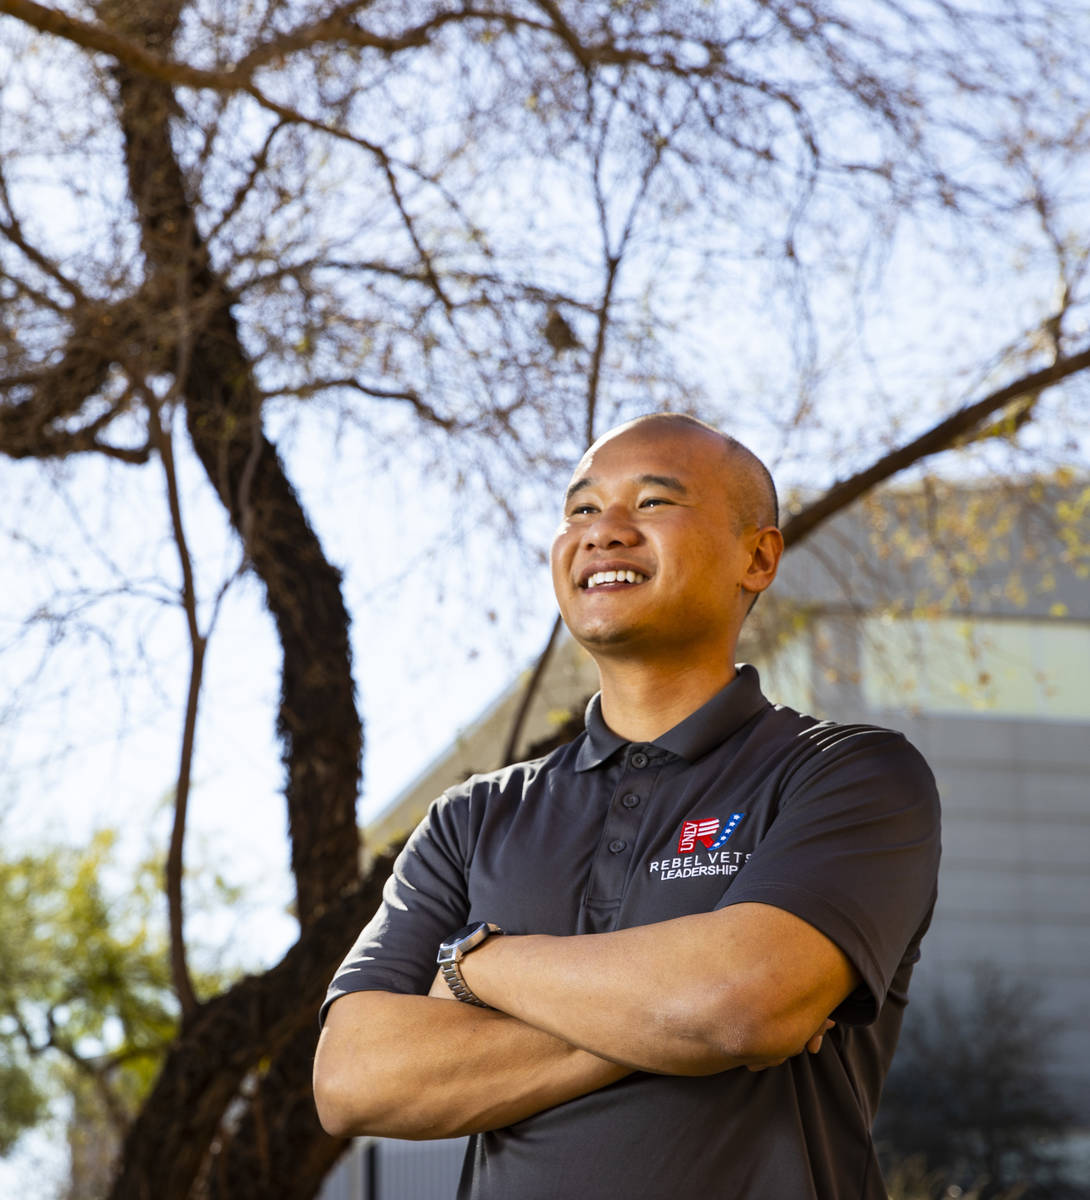 UNLV student and U.S. Air Force veteran Andrew Ho poses for a portrait on campus in Las Vegas o ...